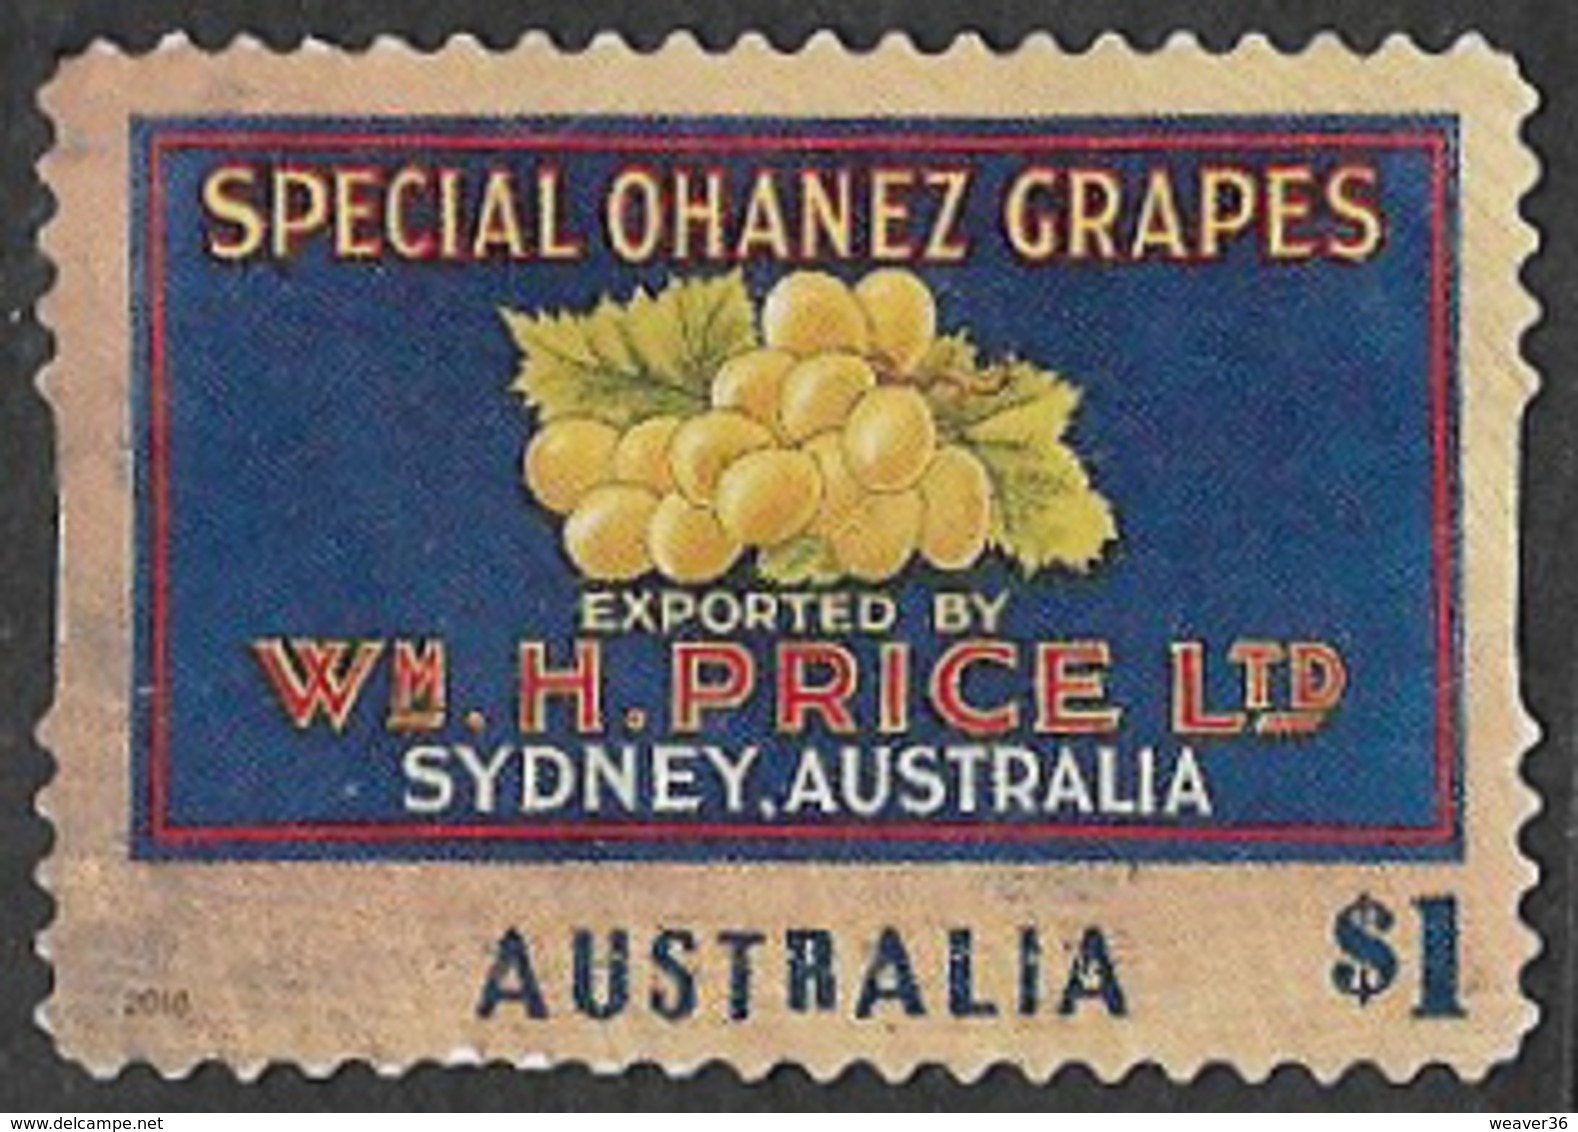 Australia 2016 Fruit Labels $1 Type 4 Self Adhesive Good/fine Used [38/31213/ND] - Used Stamps